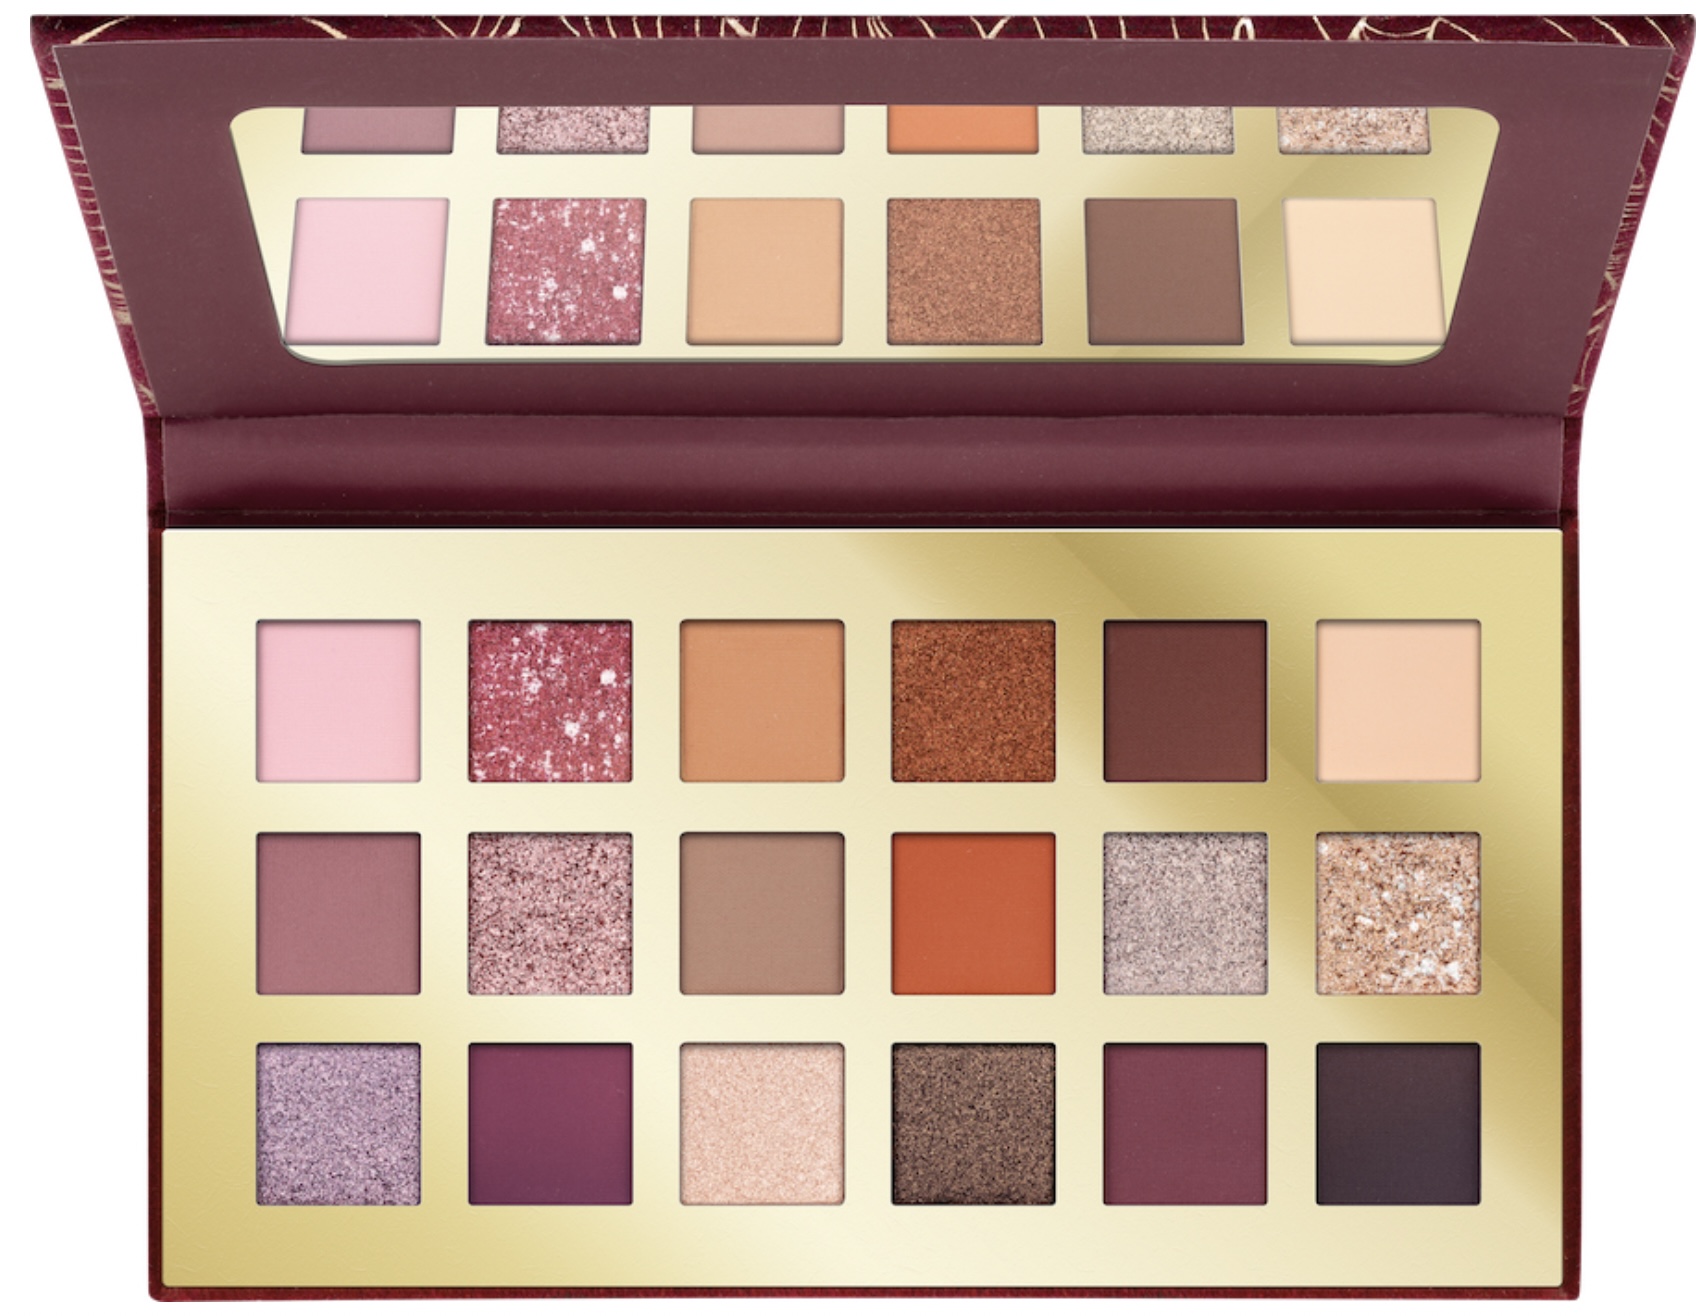 Catrice Fall in Colours Eyeshadow palette